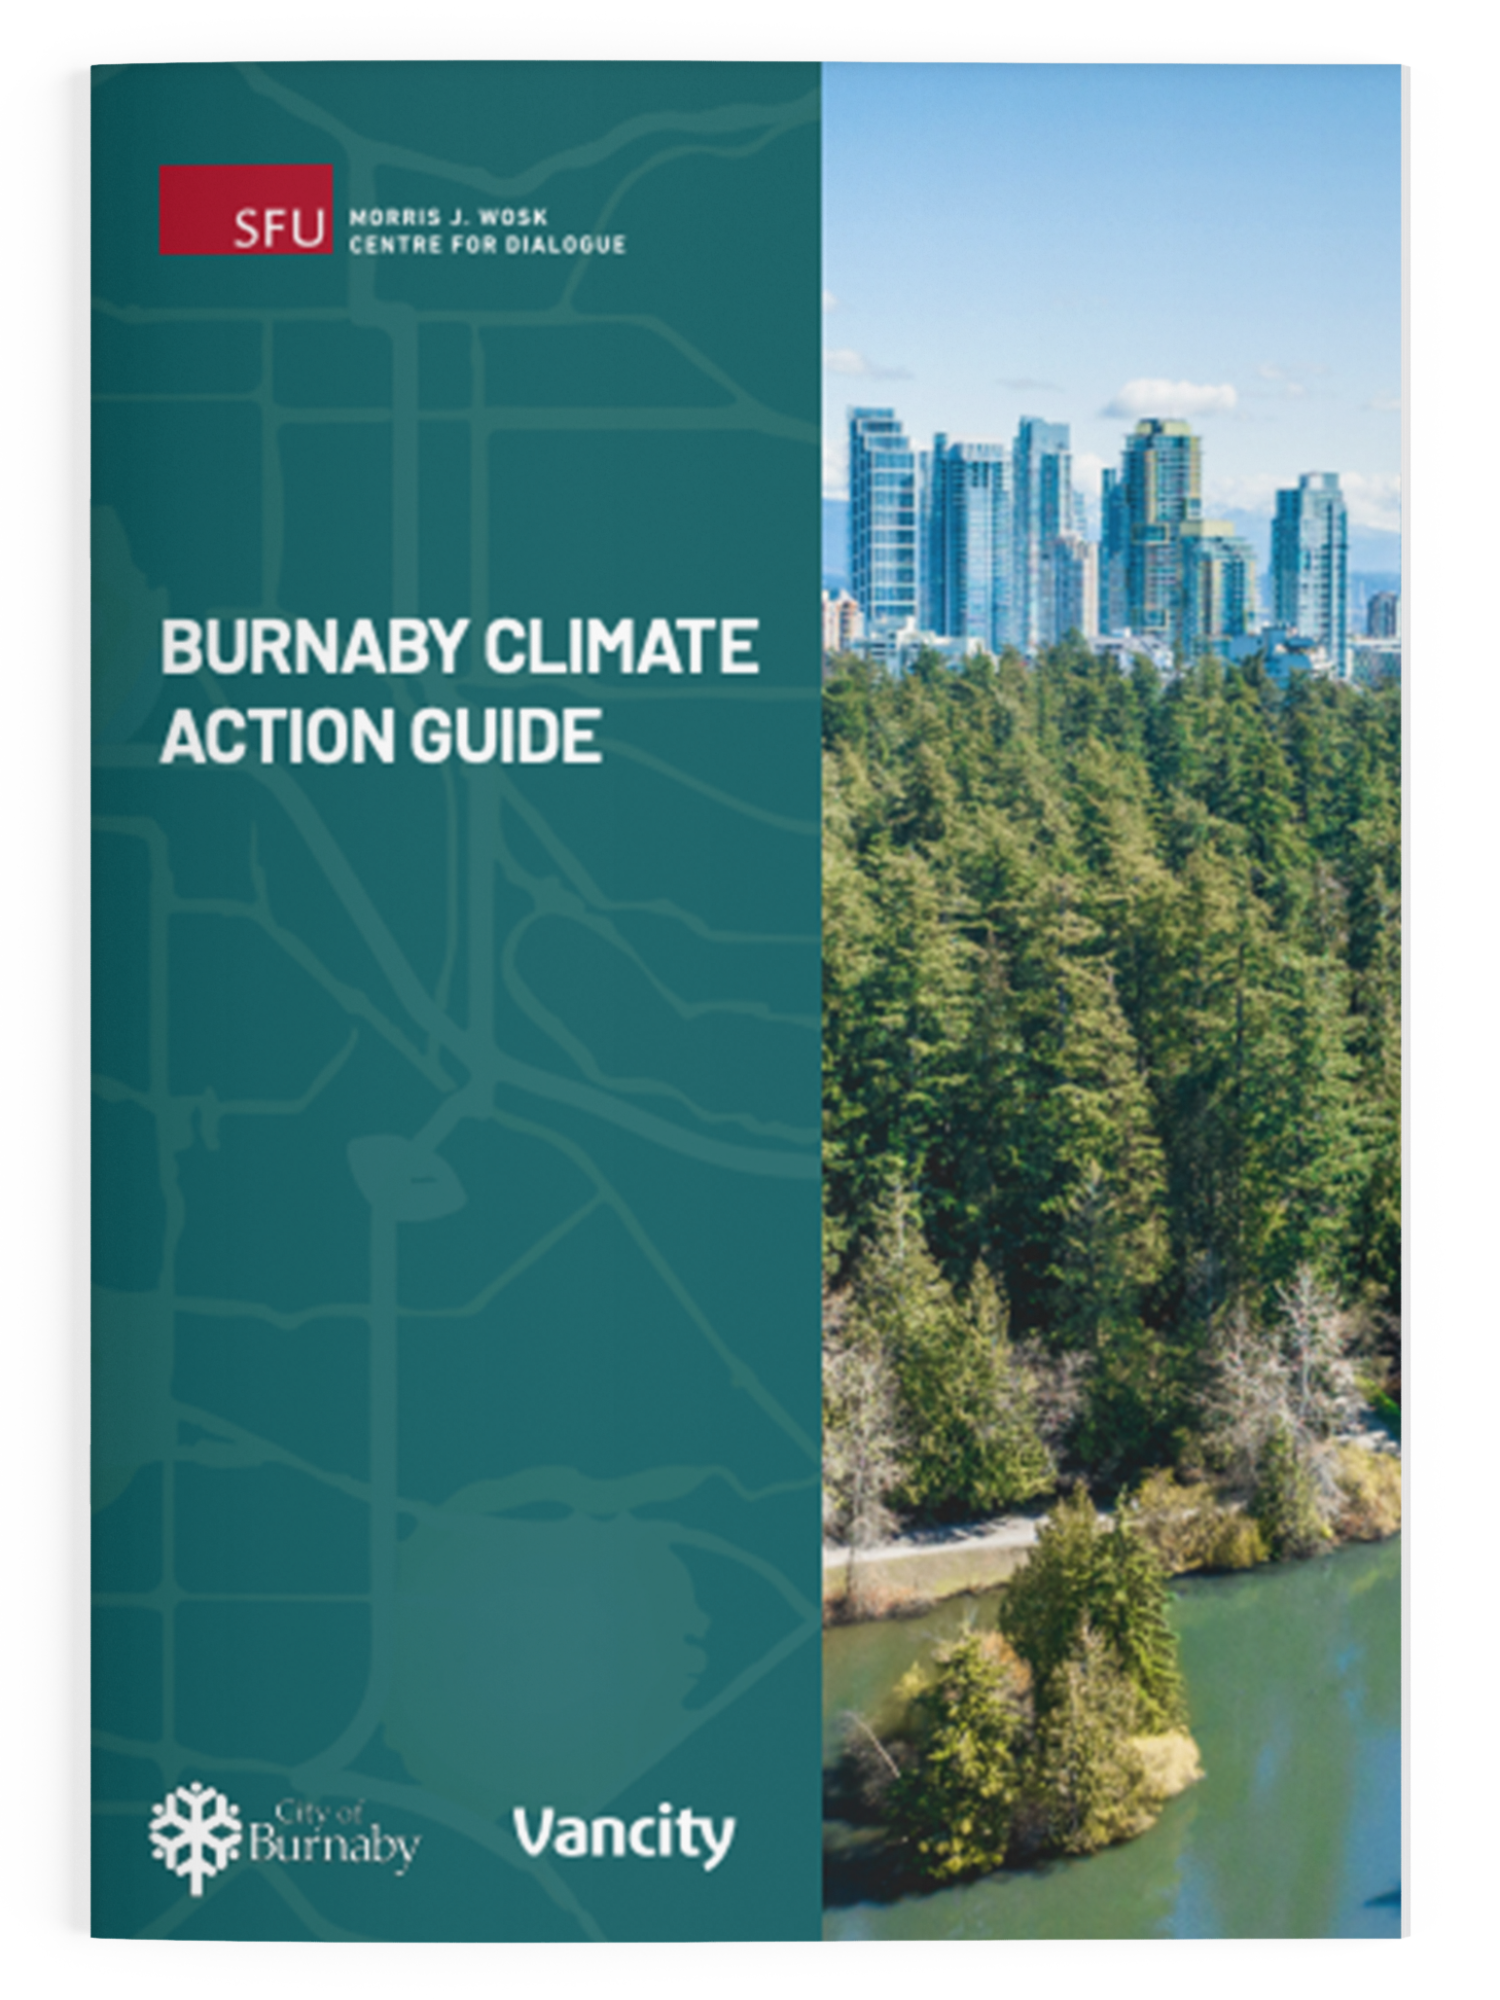 Mockup of the cover of the Burnaby Climate Action guide